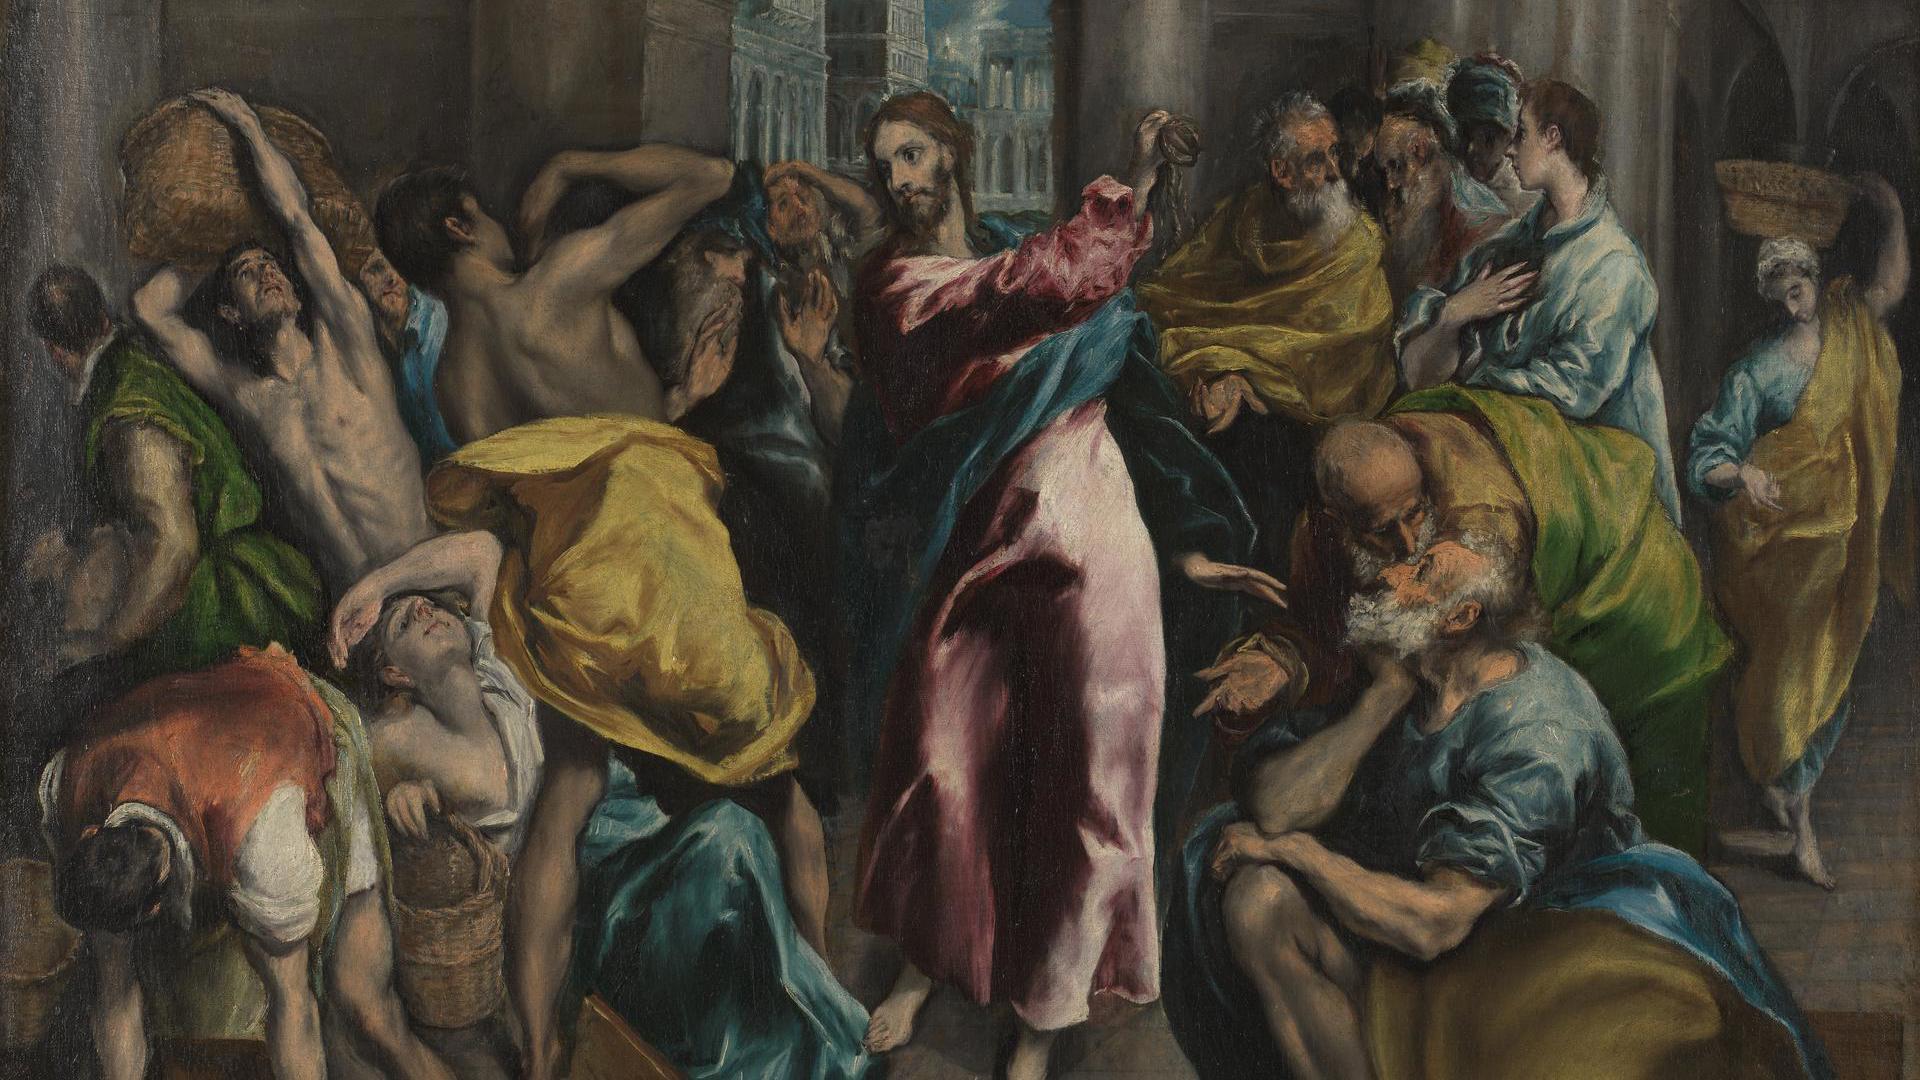 Christ driving the Traders from the Temple by El Greco